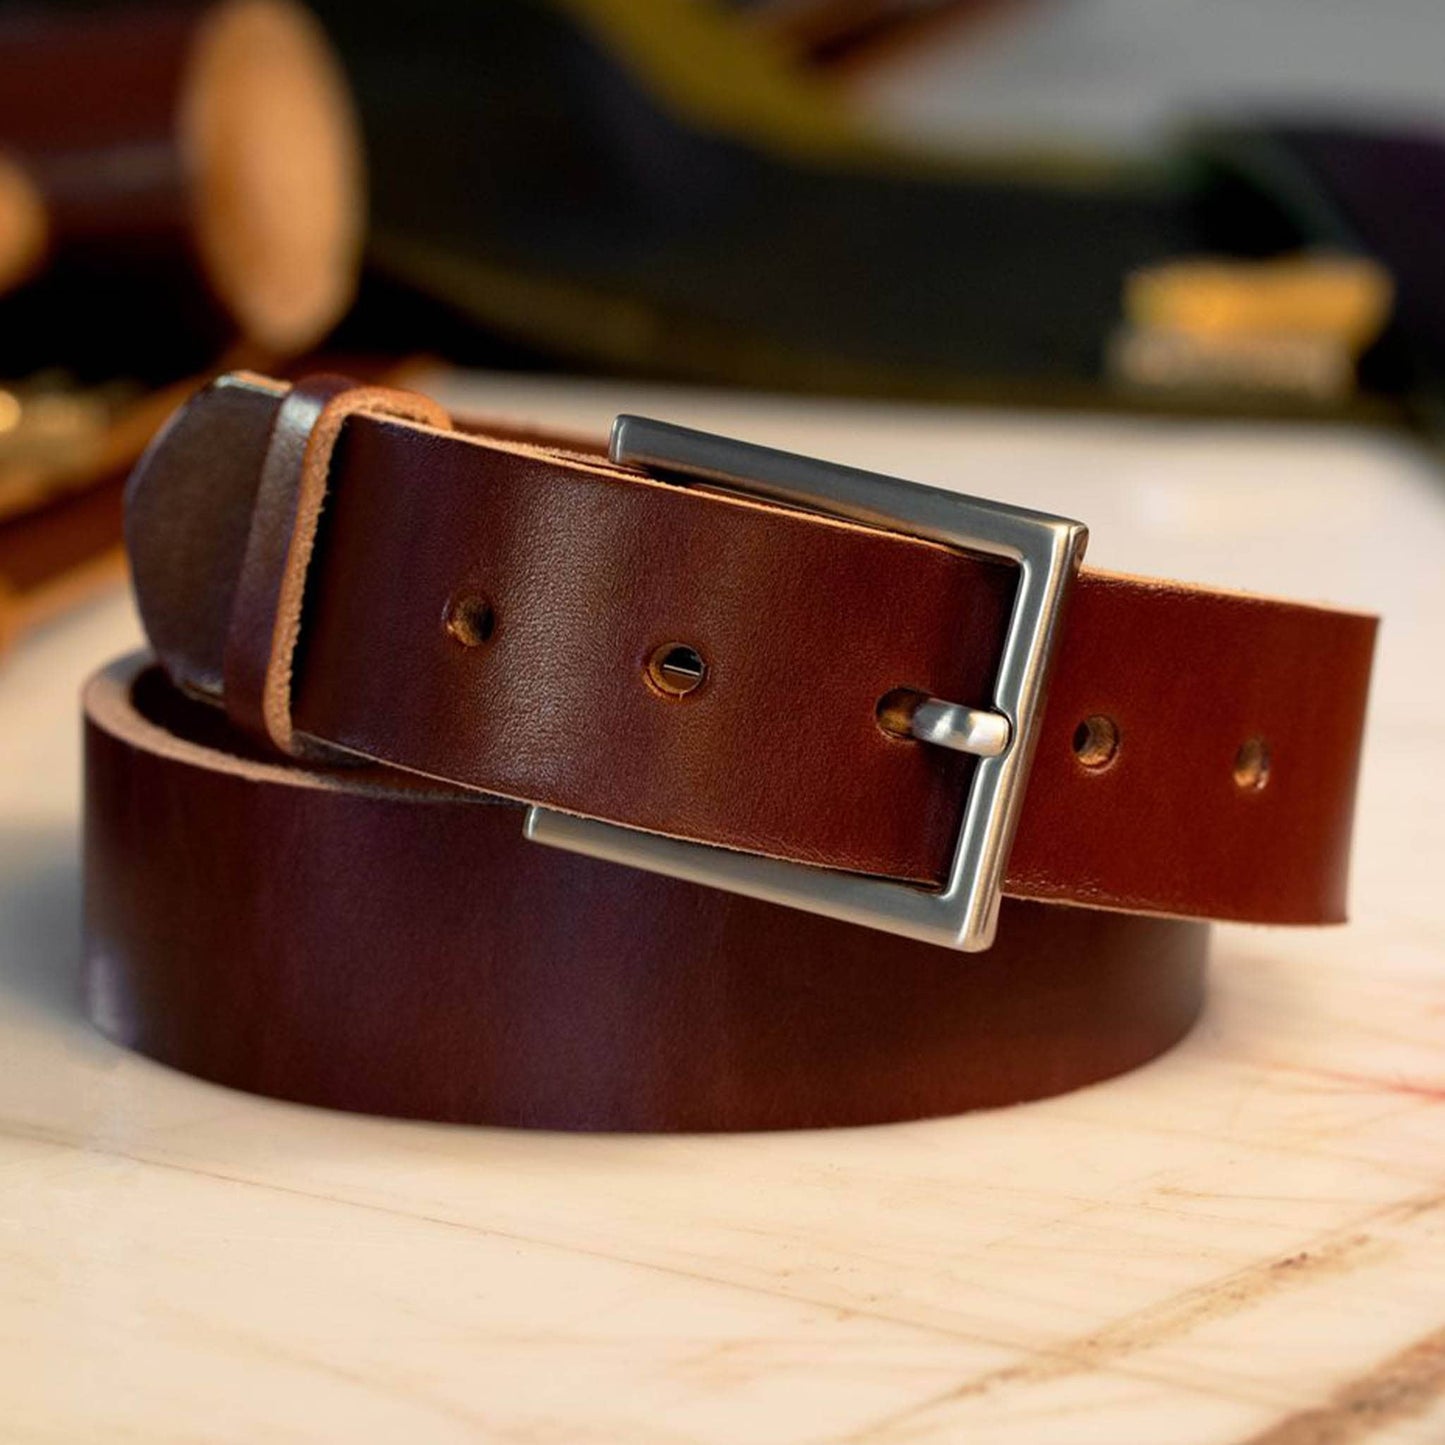 British Brown leather belt with a brushed nickel dress buckle.